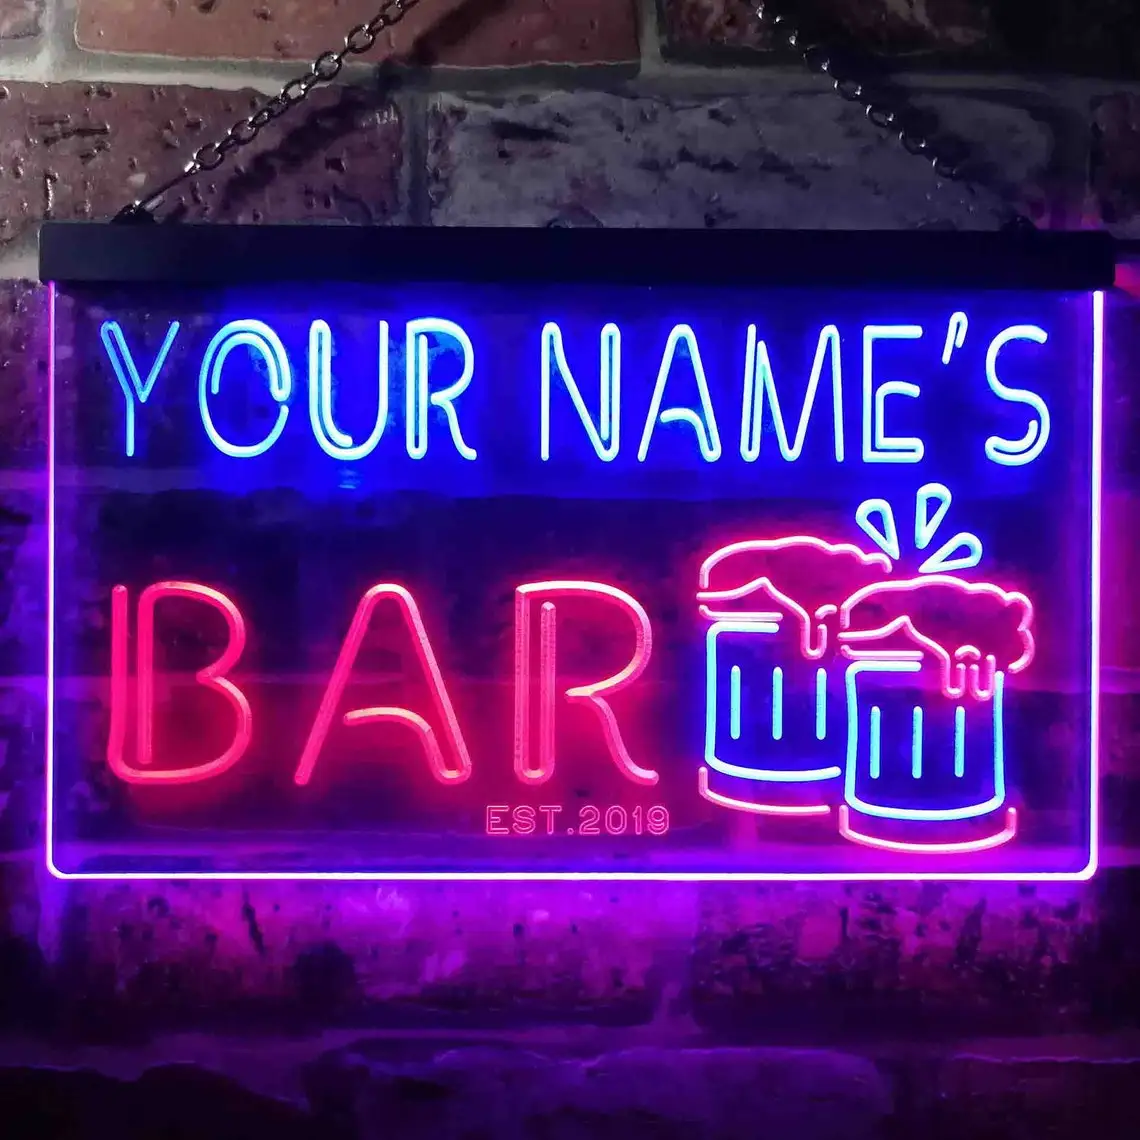 Personalized Wine Glasses Home Bar Tri-Color LED Neon Light Sign,a Unique 3D Engraved Art Decor Customize Name Date Text Man Cav